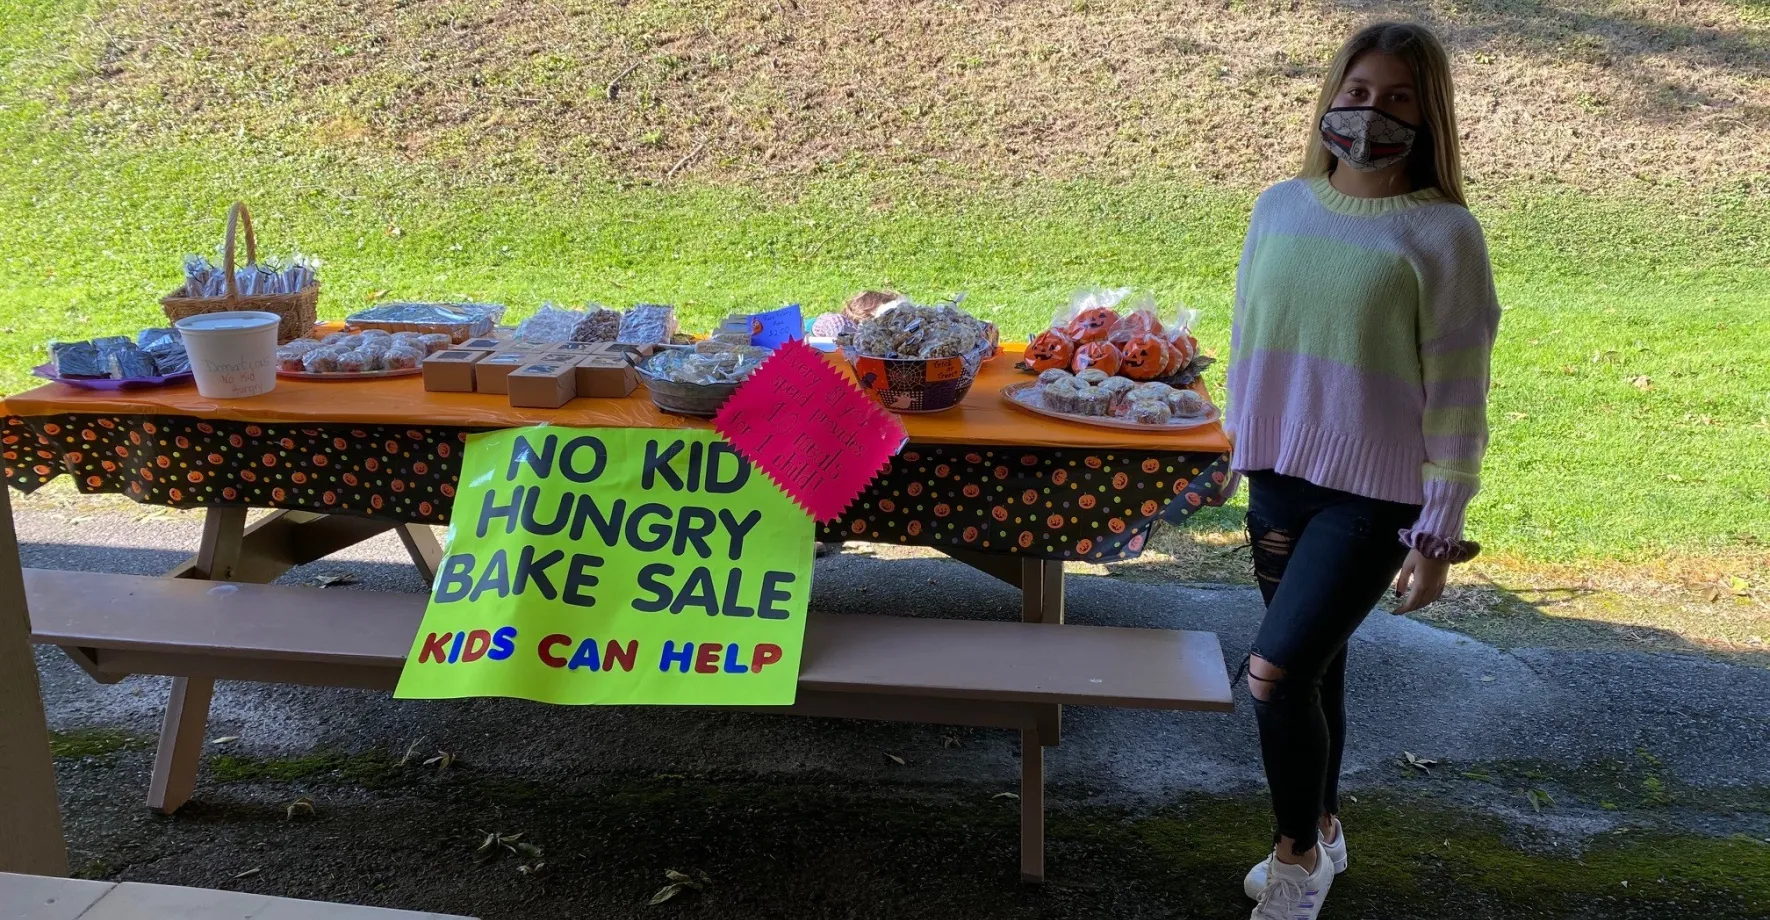 Girl wearing mask at bake sale charity event